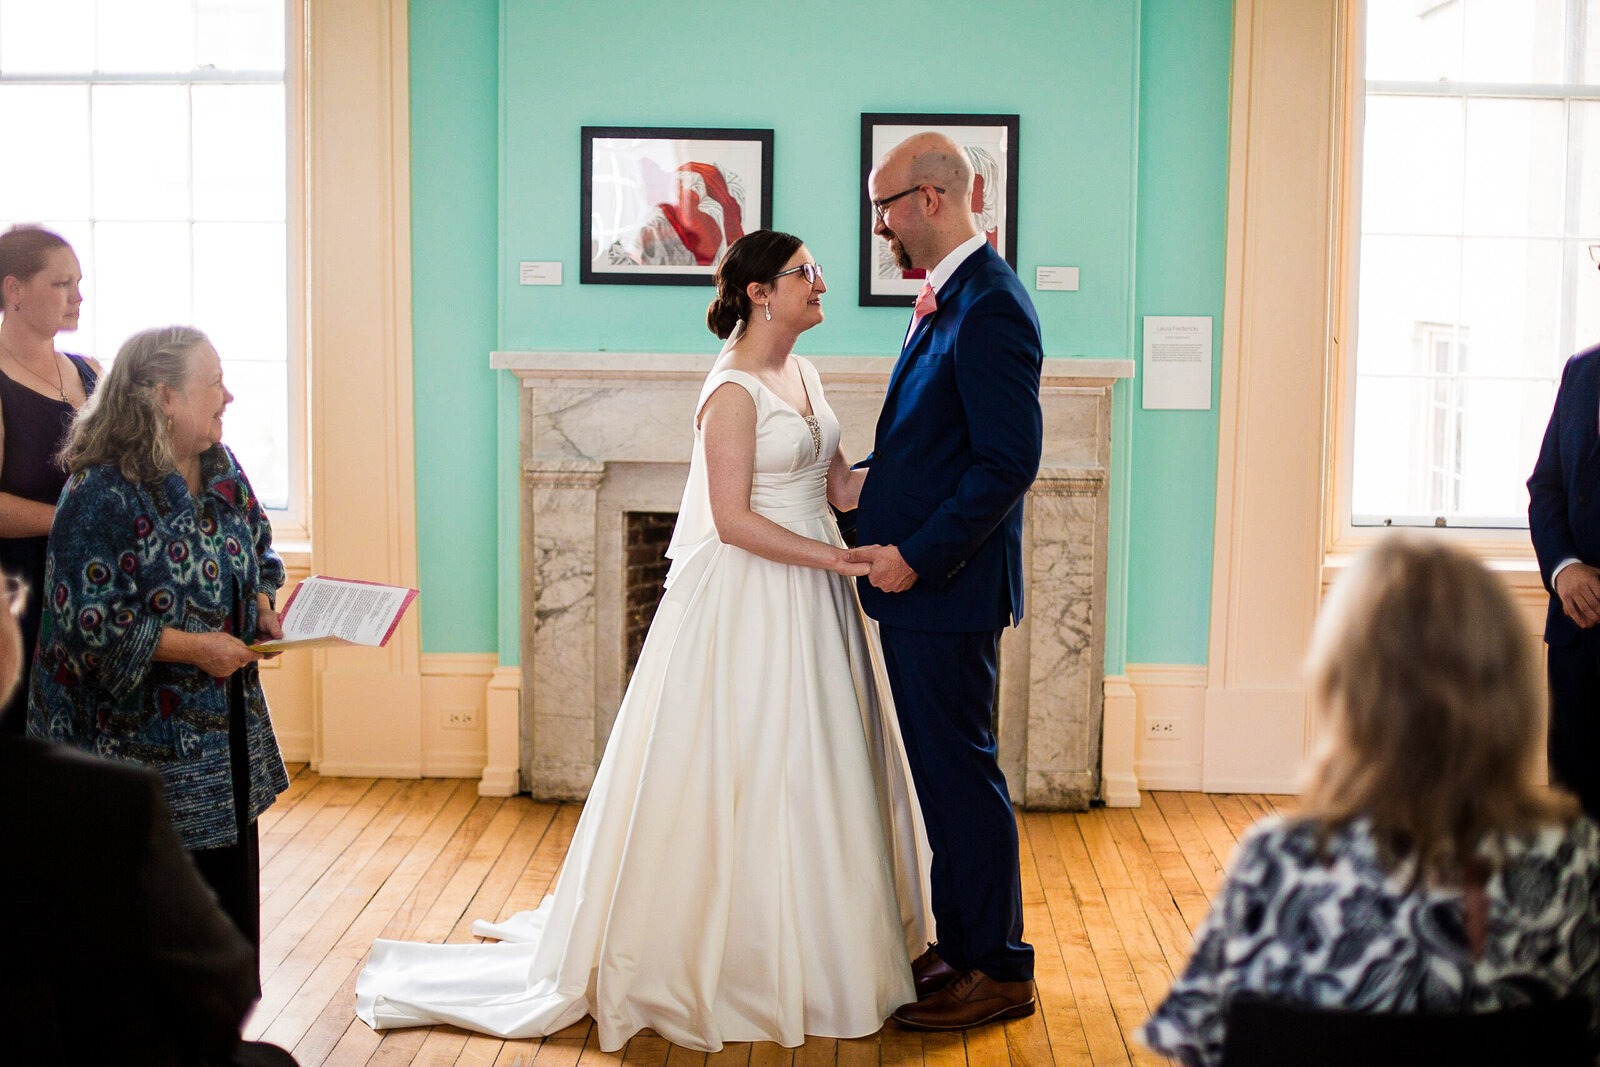 Bride and groom exchange vows at Erie Art Museum